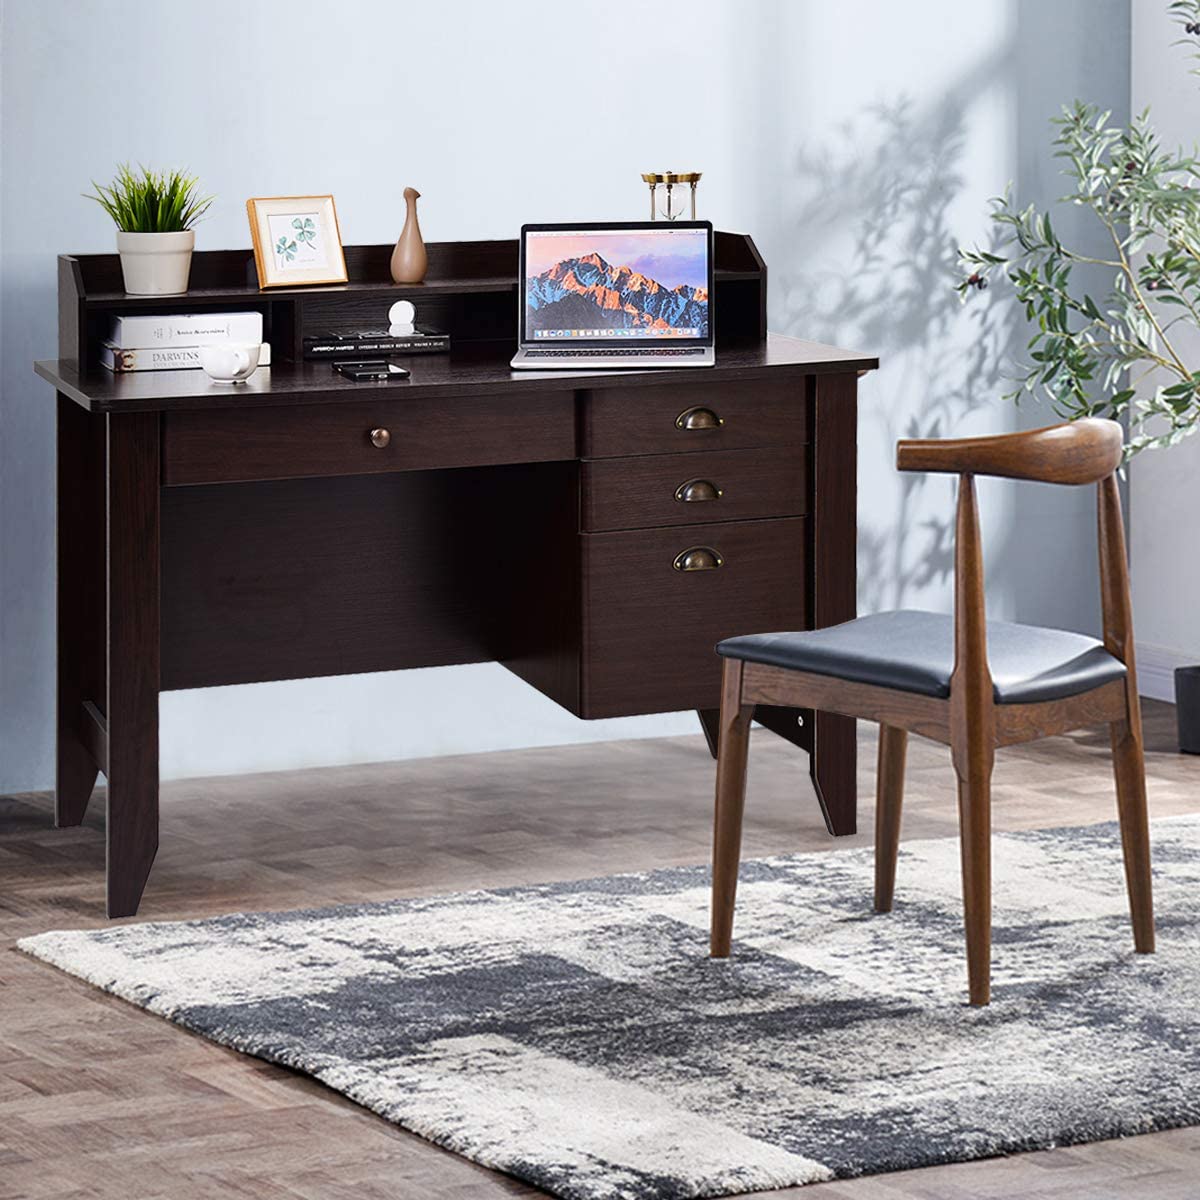 Tangkula Computer Desk with 4 Storage Drawers & Hutch, Home Office Desk Vintage Desk with Storage Shelves, Wooden Executive Desk Writing Study Desk